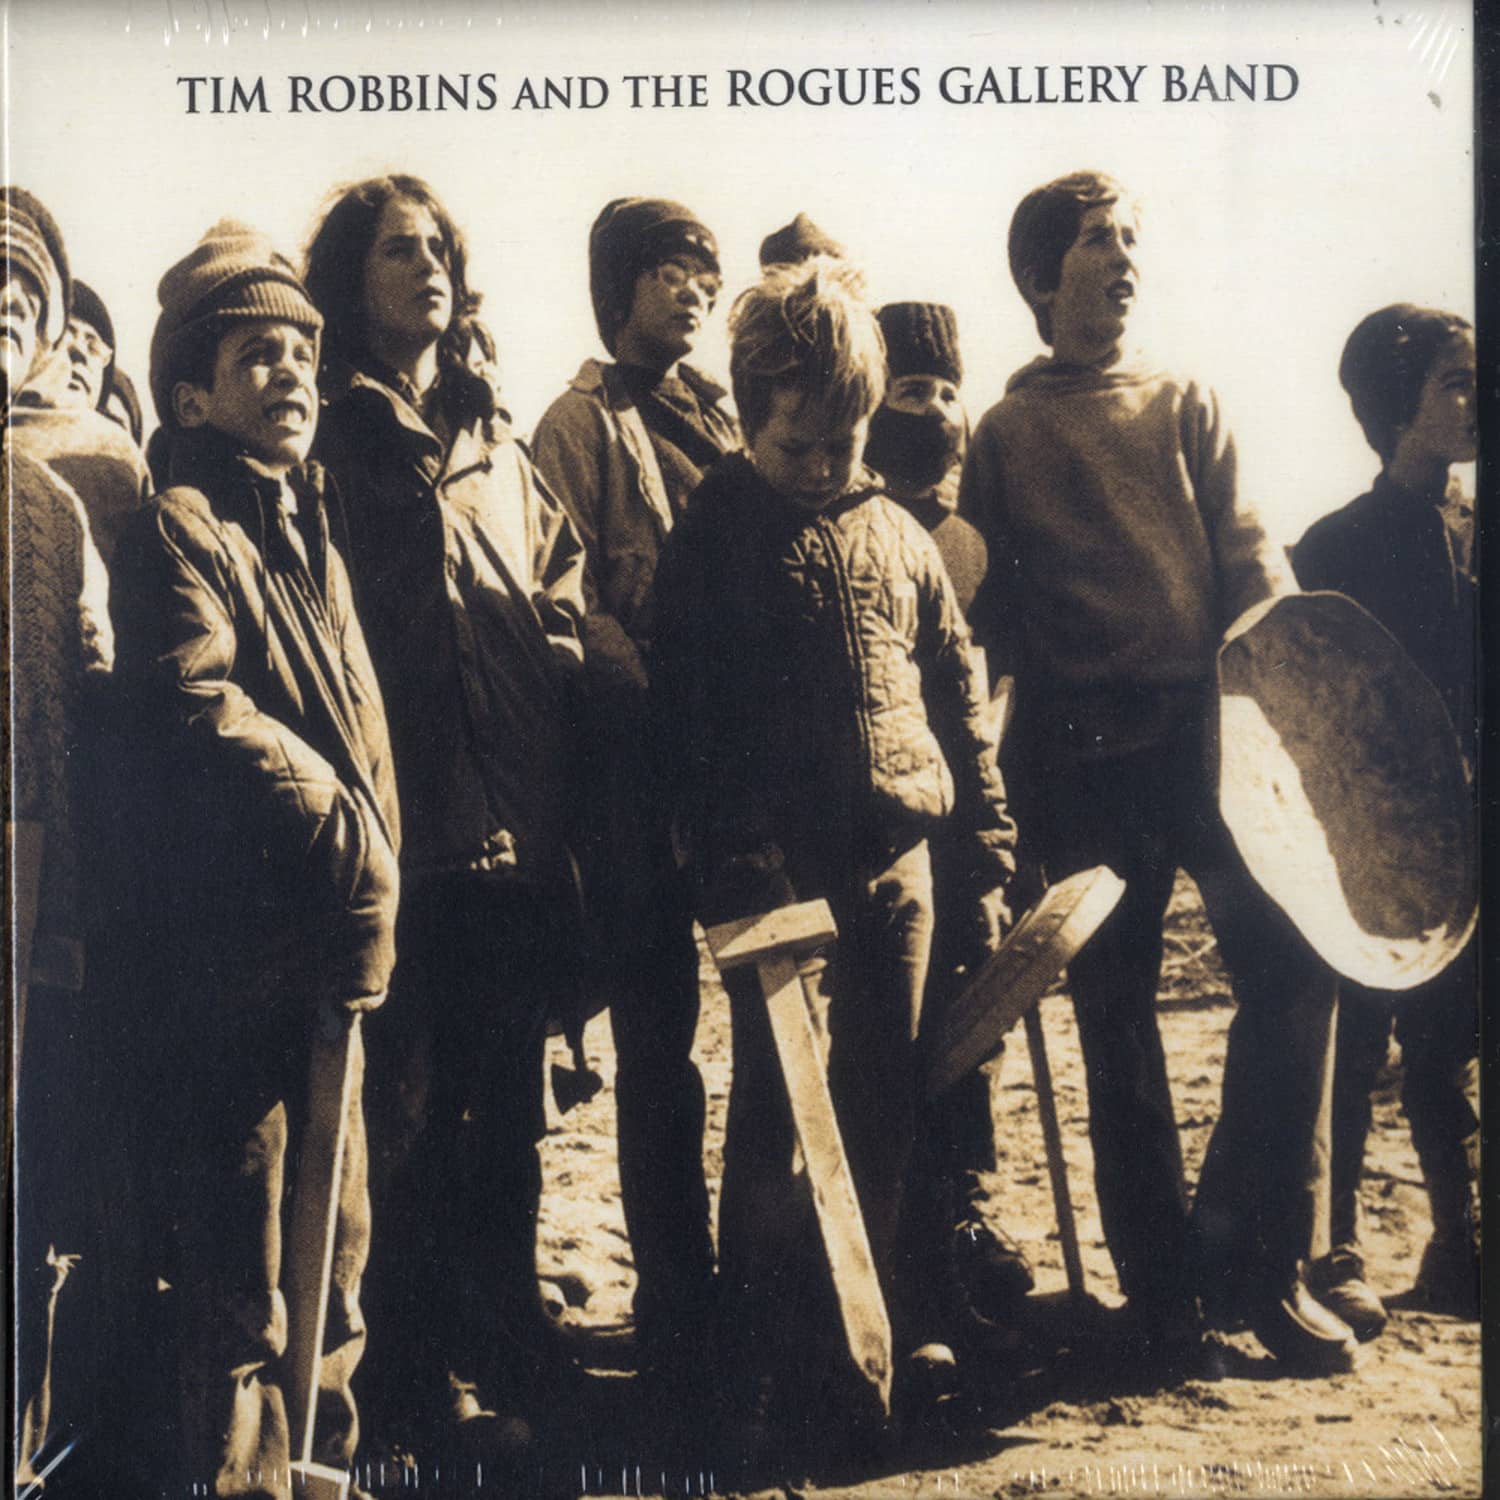 Tim Robbins And The Rogues Gallery Band - TIM ROBBINS AND THE ROGUES GALLERY BAND /CD)